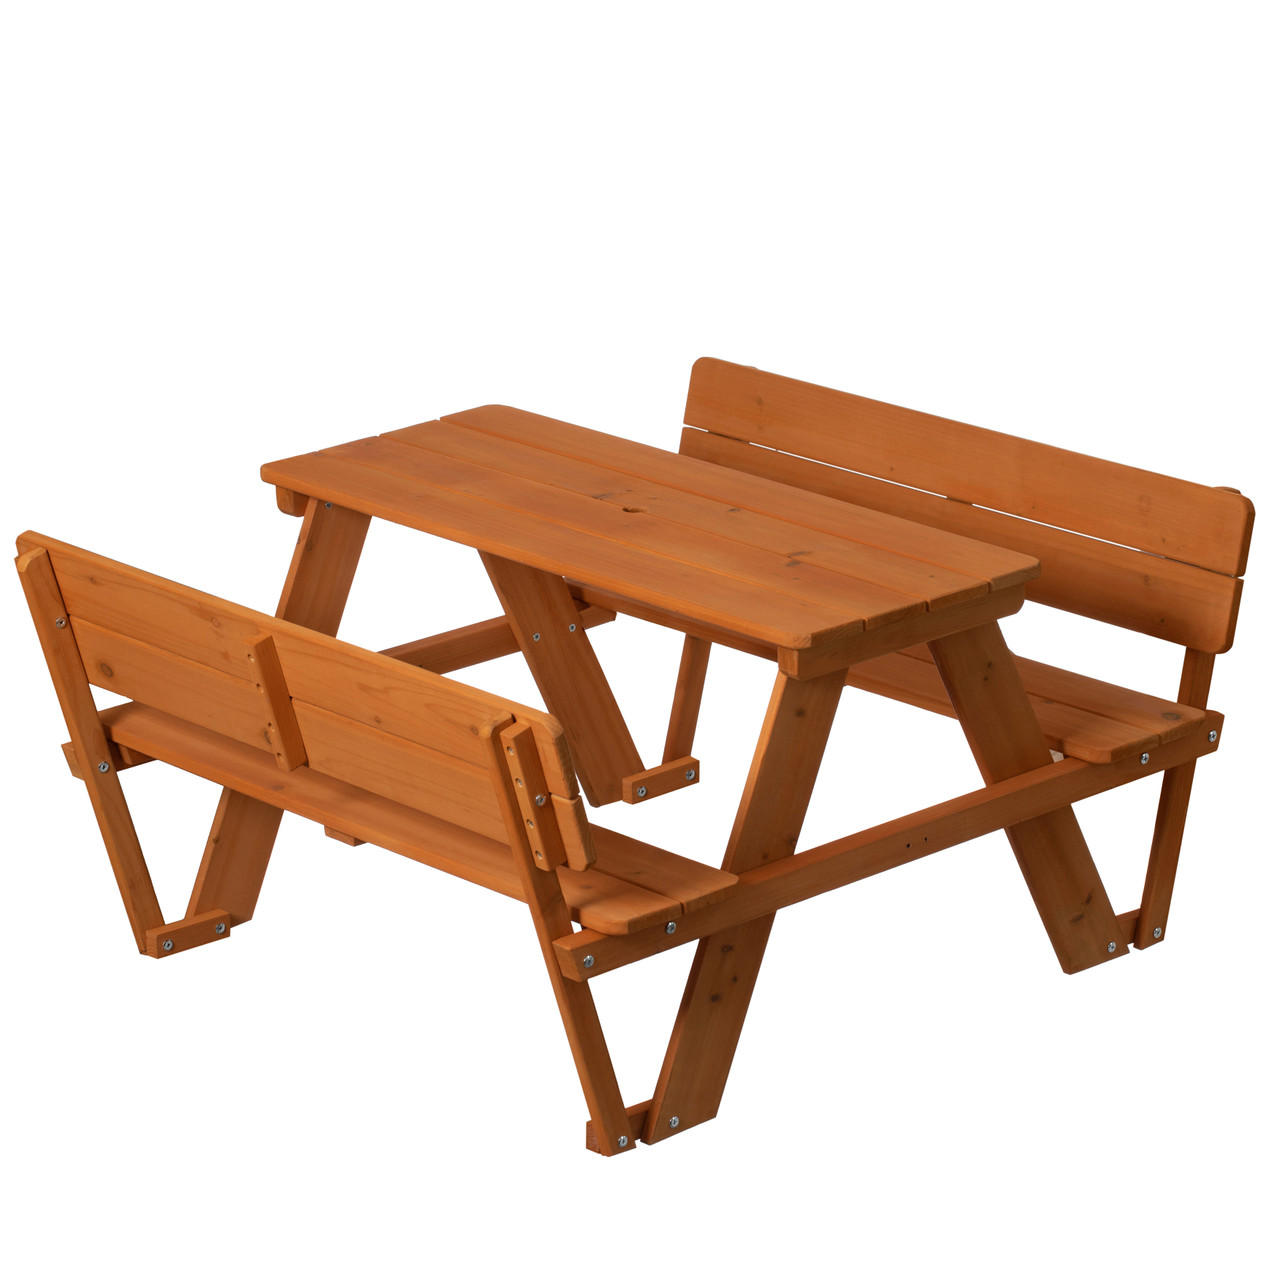 Kids' Outdoor Picnic Tables